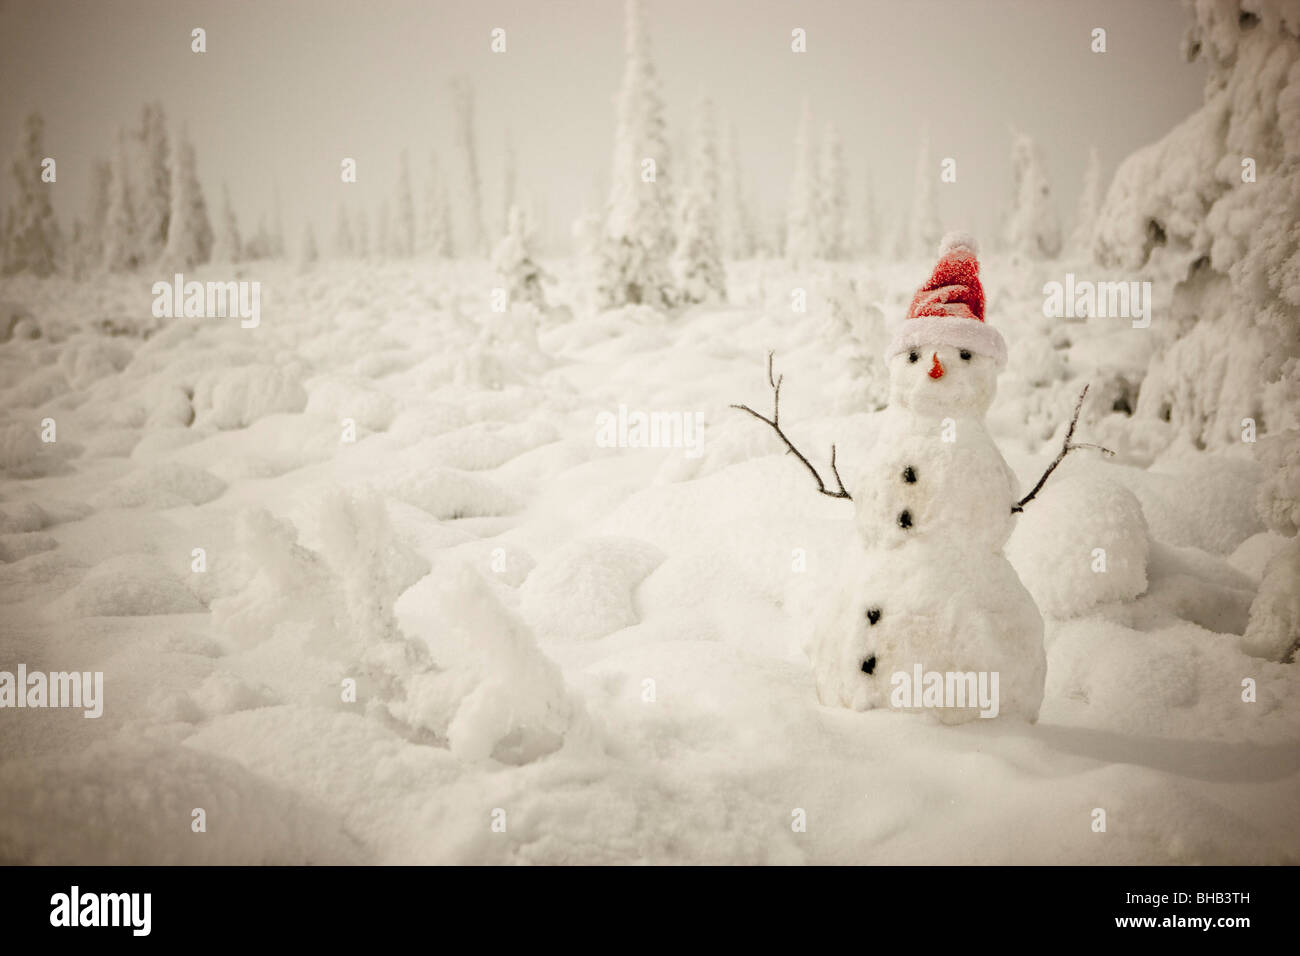 Snowman with red scarf and spruce forest, winter, wide angle from below, Anchorage, Alaska Stock Photo